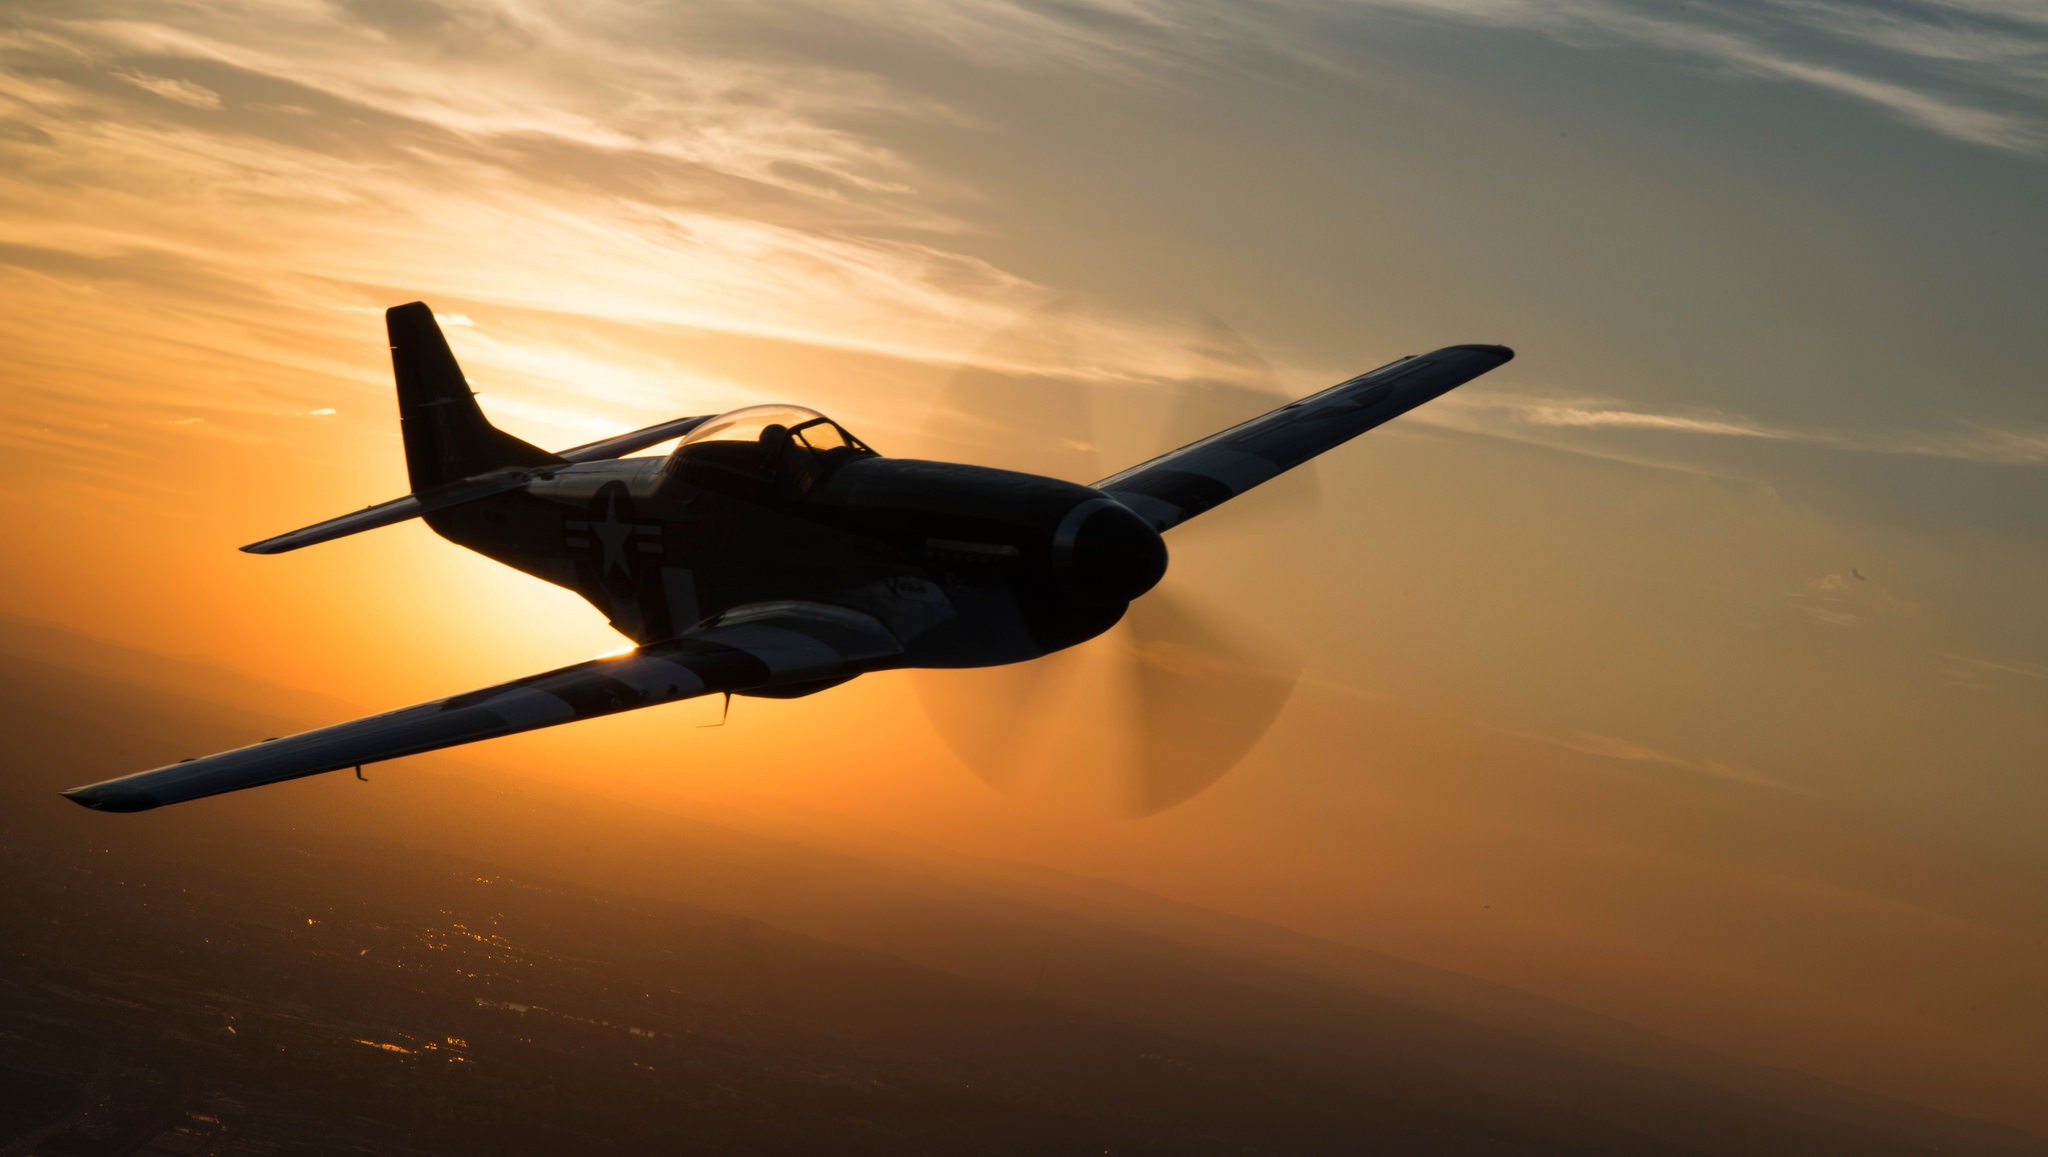 General 2048x1157 military aircraft aircraft sunset silhouette North American P-51 Mustang Warbird vehicle military vehicle orange sky sky military